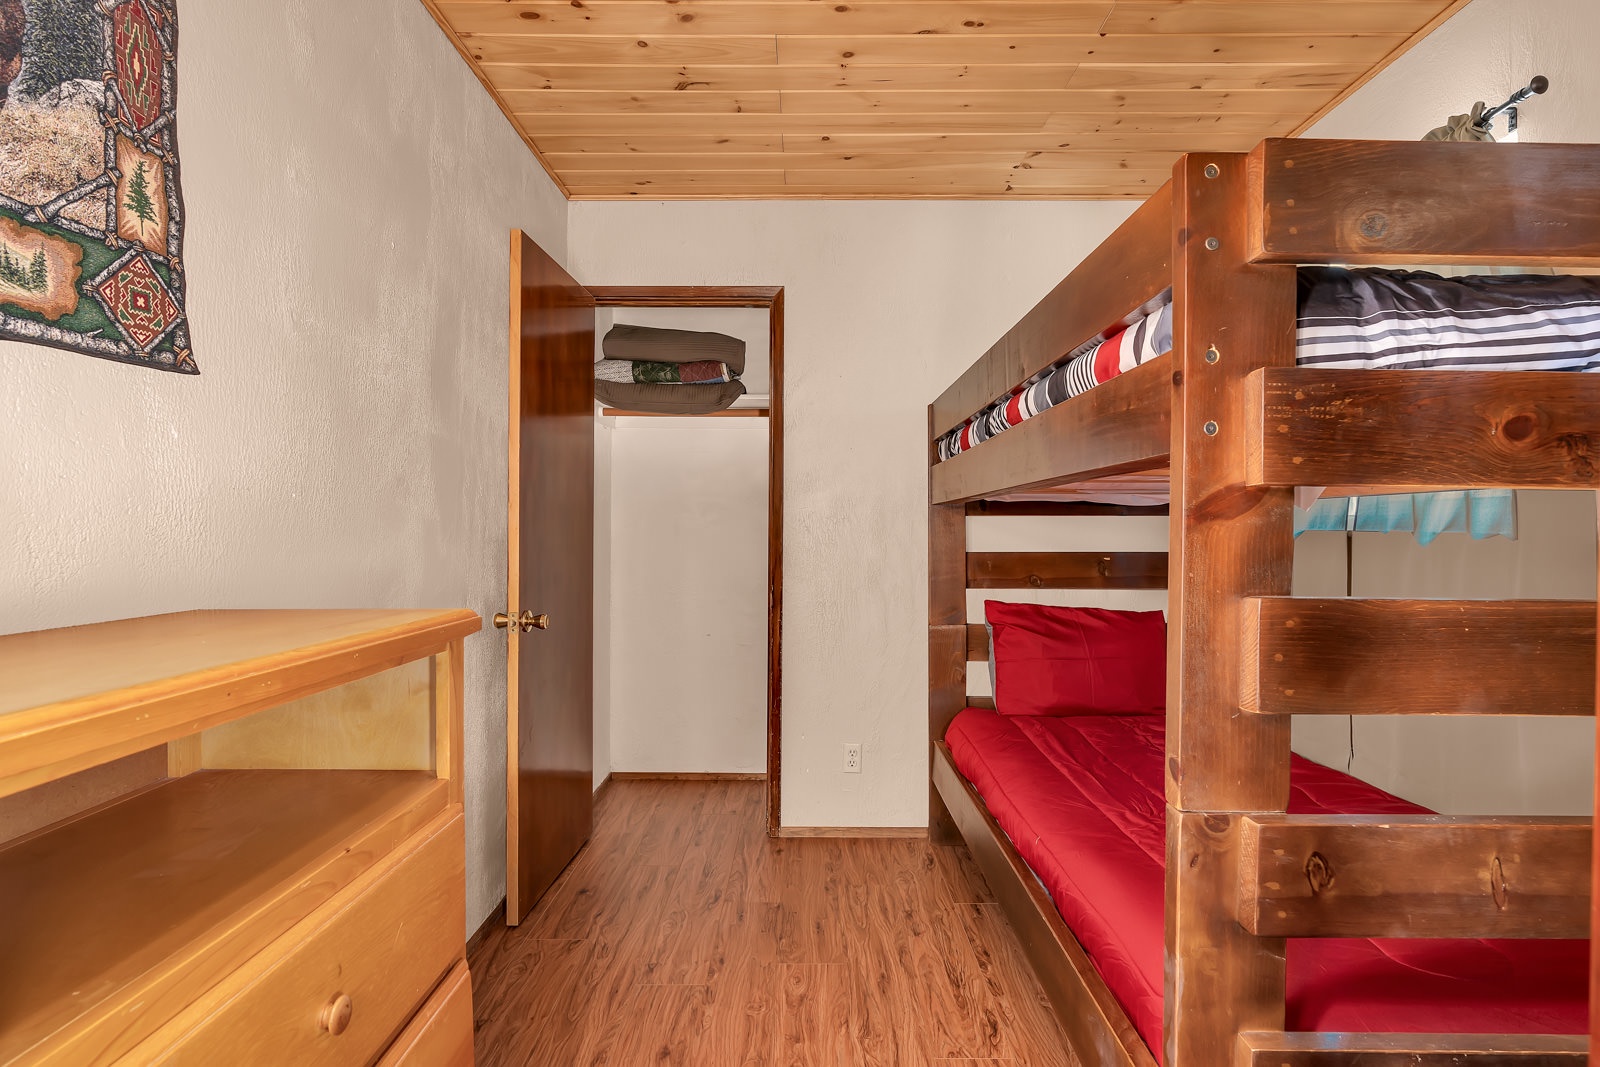 Bedroom #3, with 2 twin-over-twin bunk beds